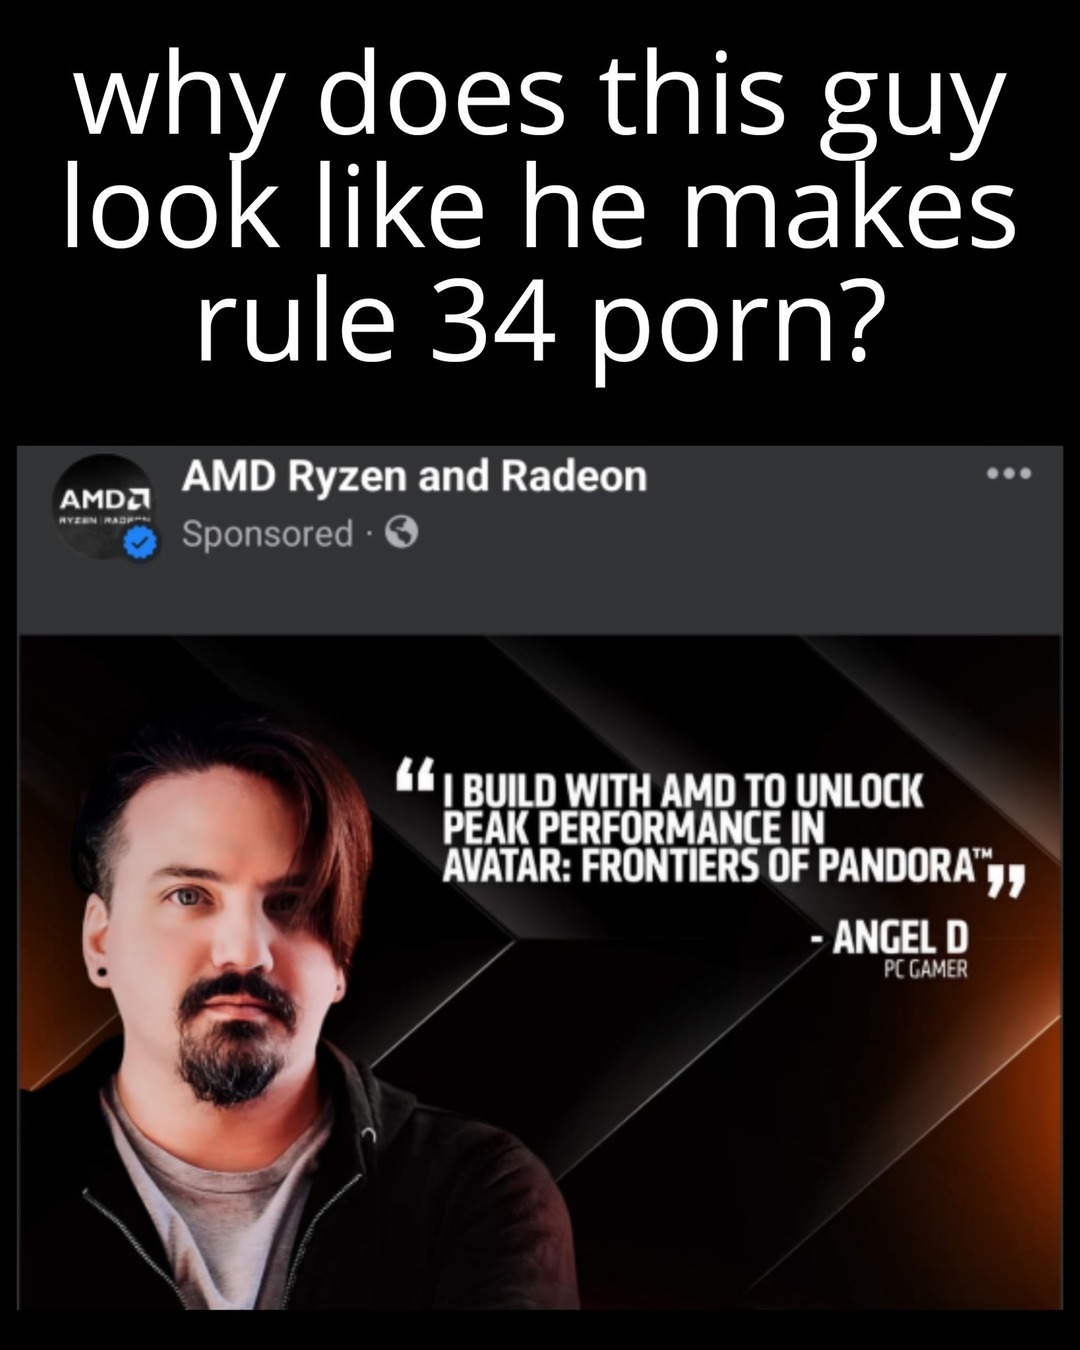 AMD thought he looked good for this advert   - meme